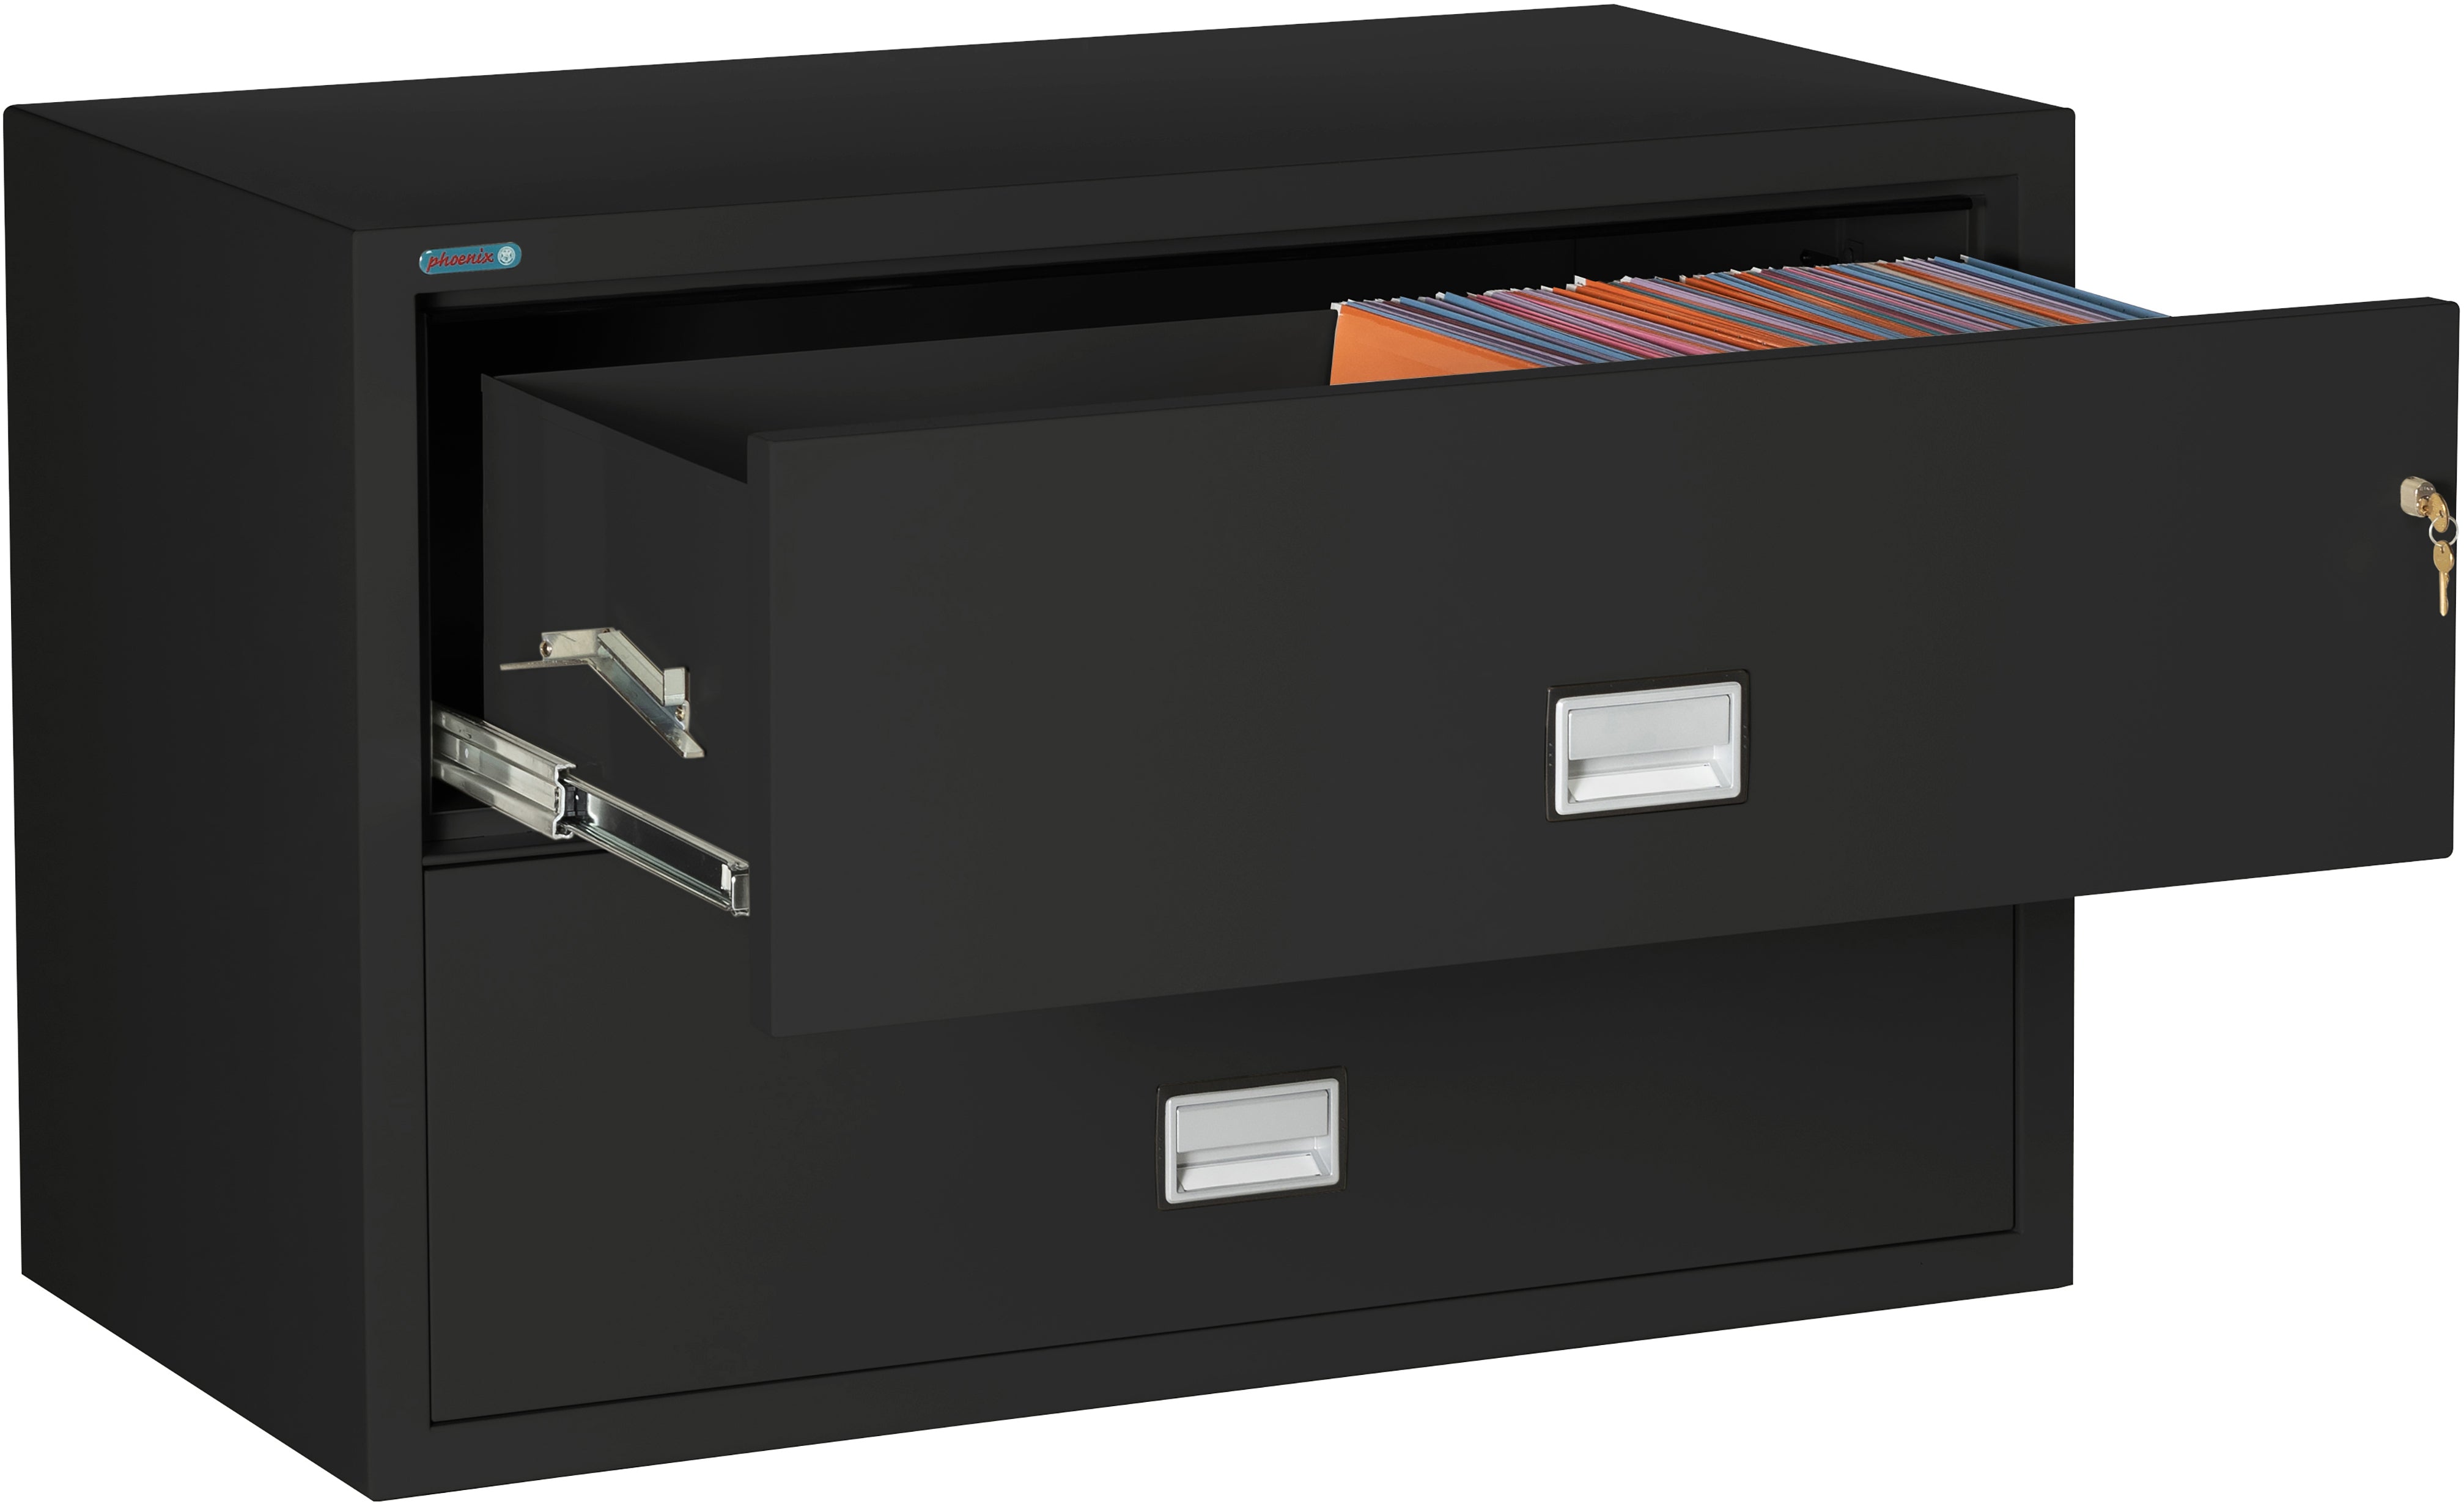 Drawer Lateral Size Fire File Cabinet